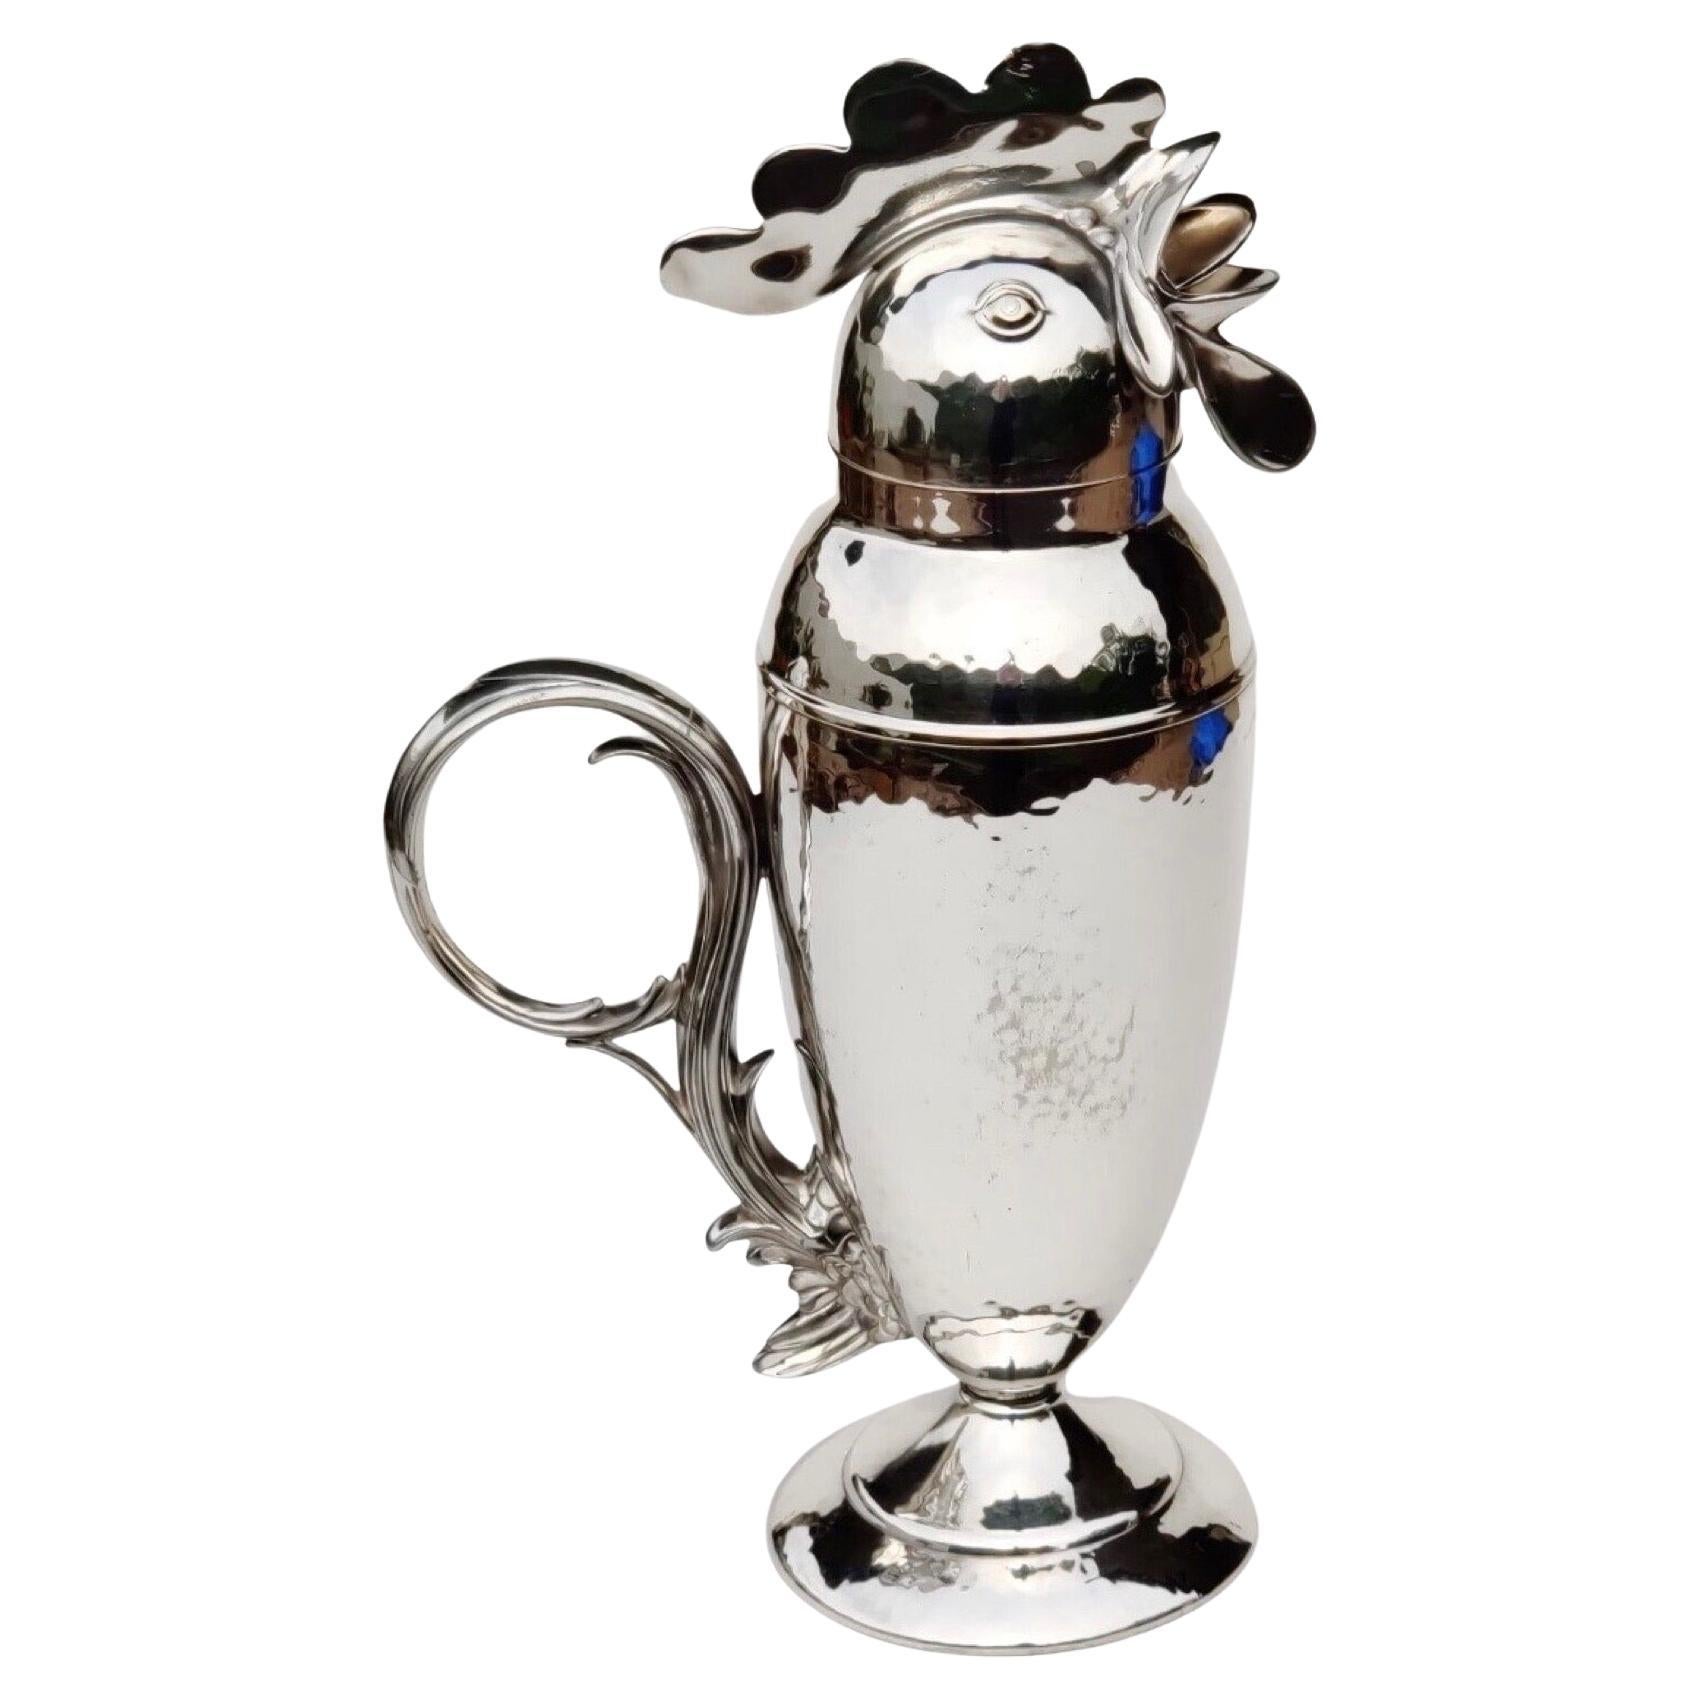 Original 1928 Antique Wallace Brothers Silver Plated Rooster Cocktail Shaker, Ar